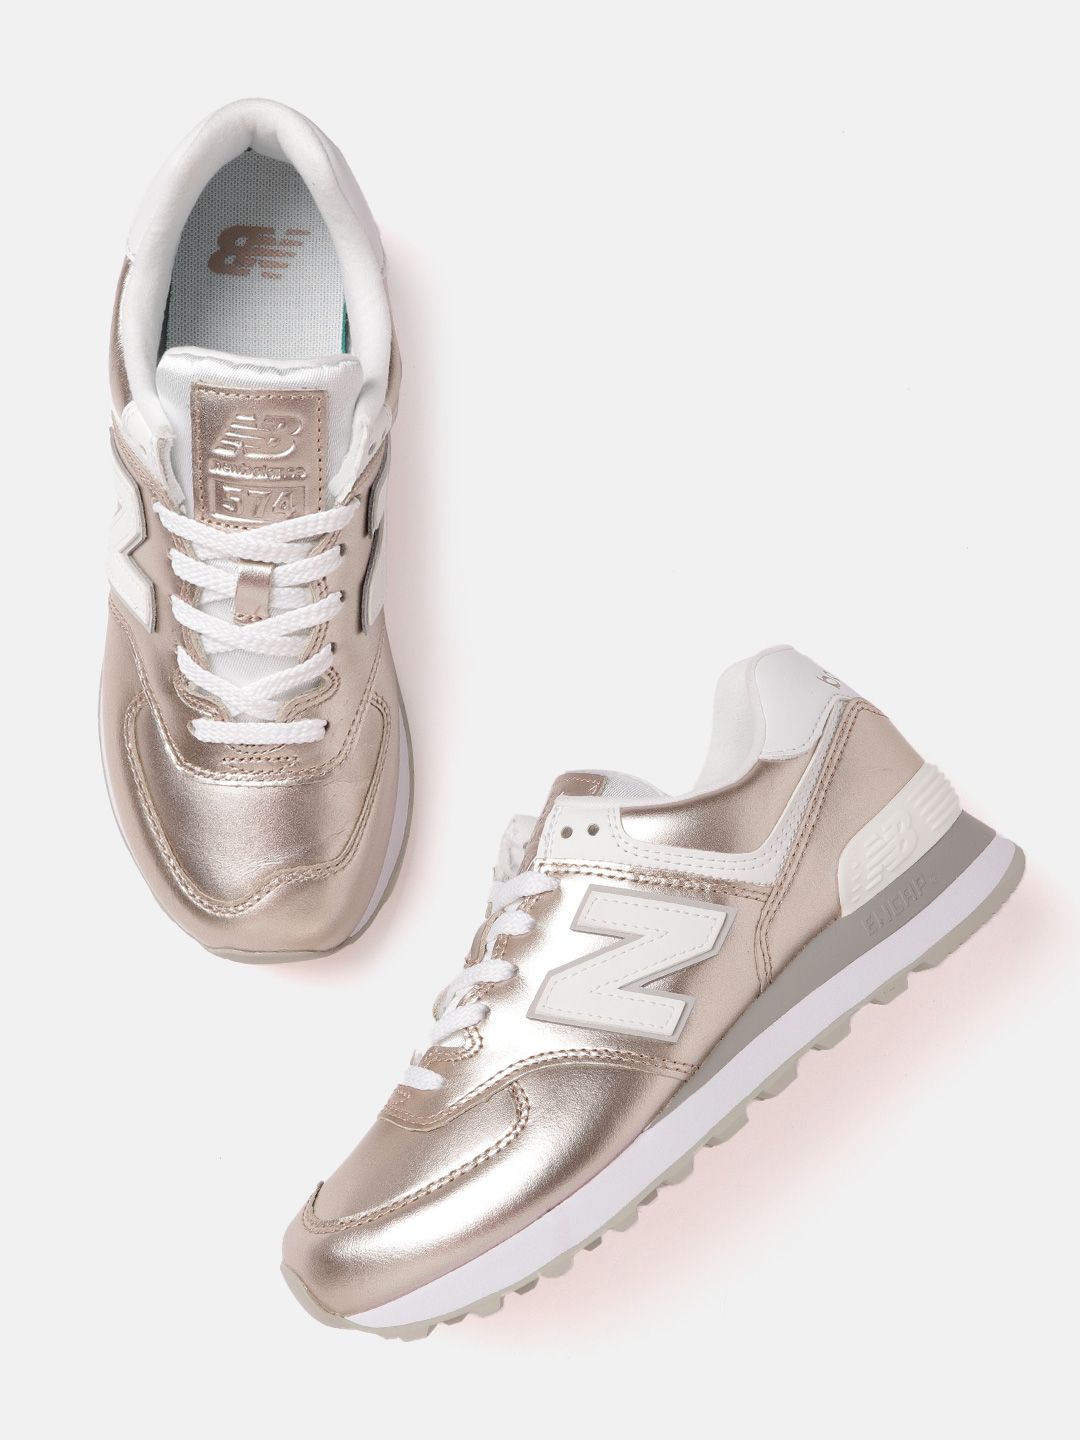 New Balance Women Gold-Toned & Beige Solid Sneakers Price in India